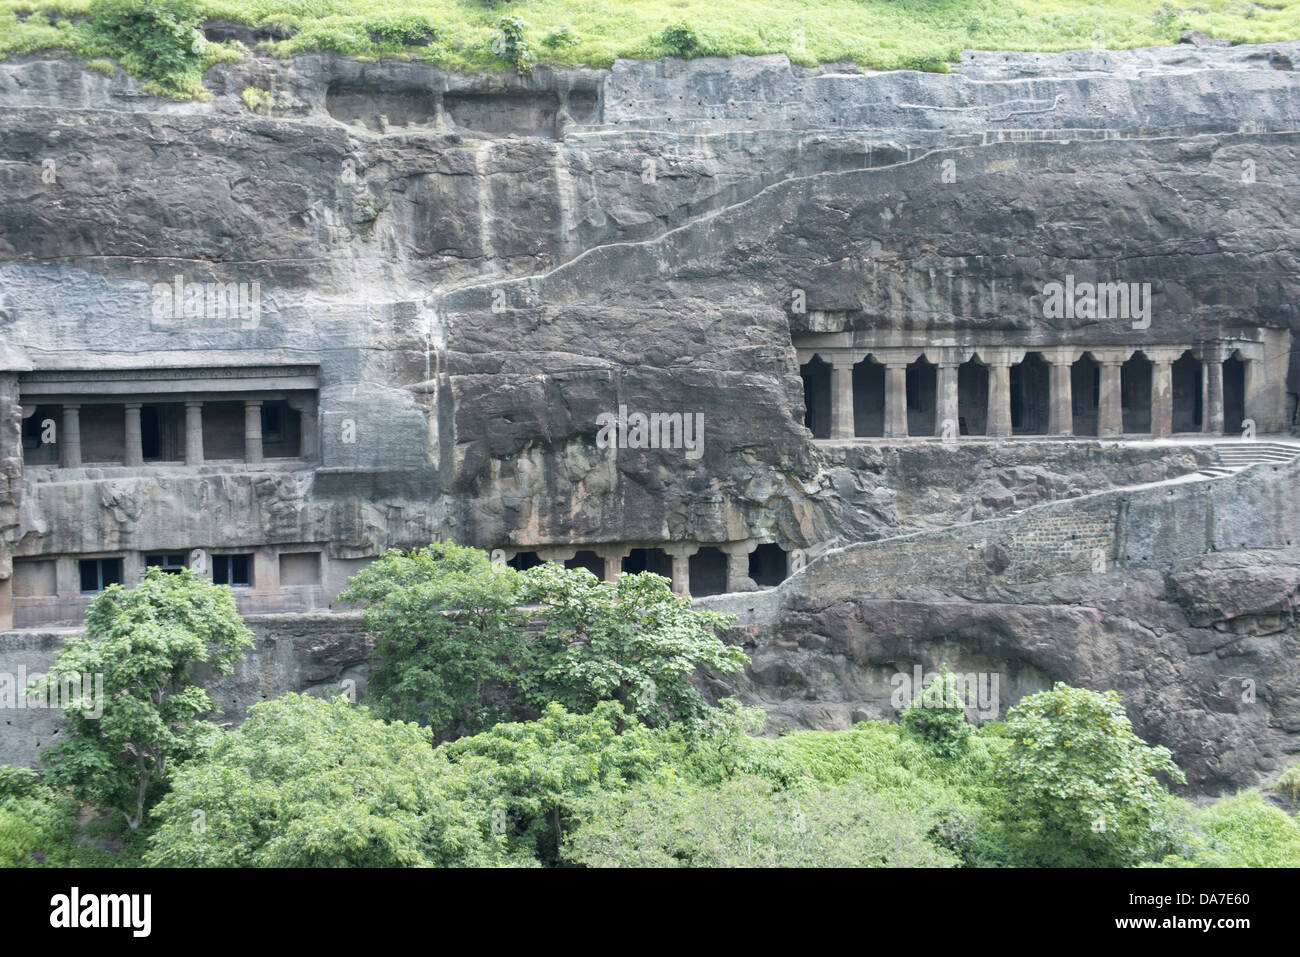 General-View of cave Nos. 4, 5 and double storey No.6 at Ajanta, Maharashtra, These Mahayana caves are dated to 5th.century A.D. Stock Photo